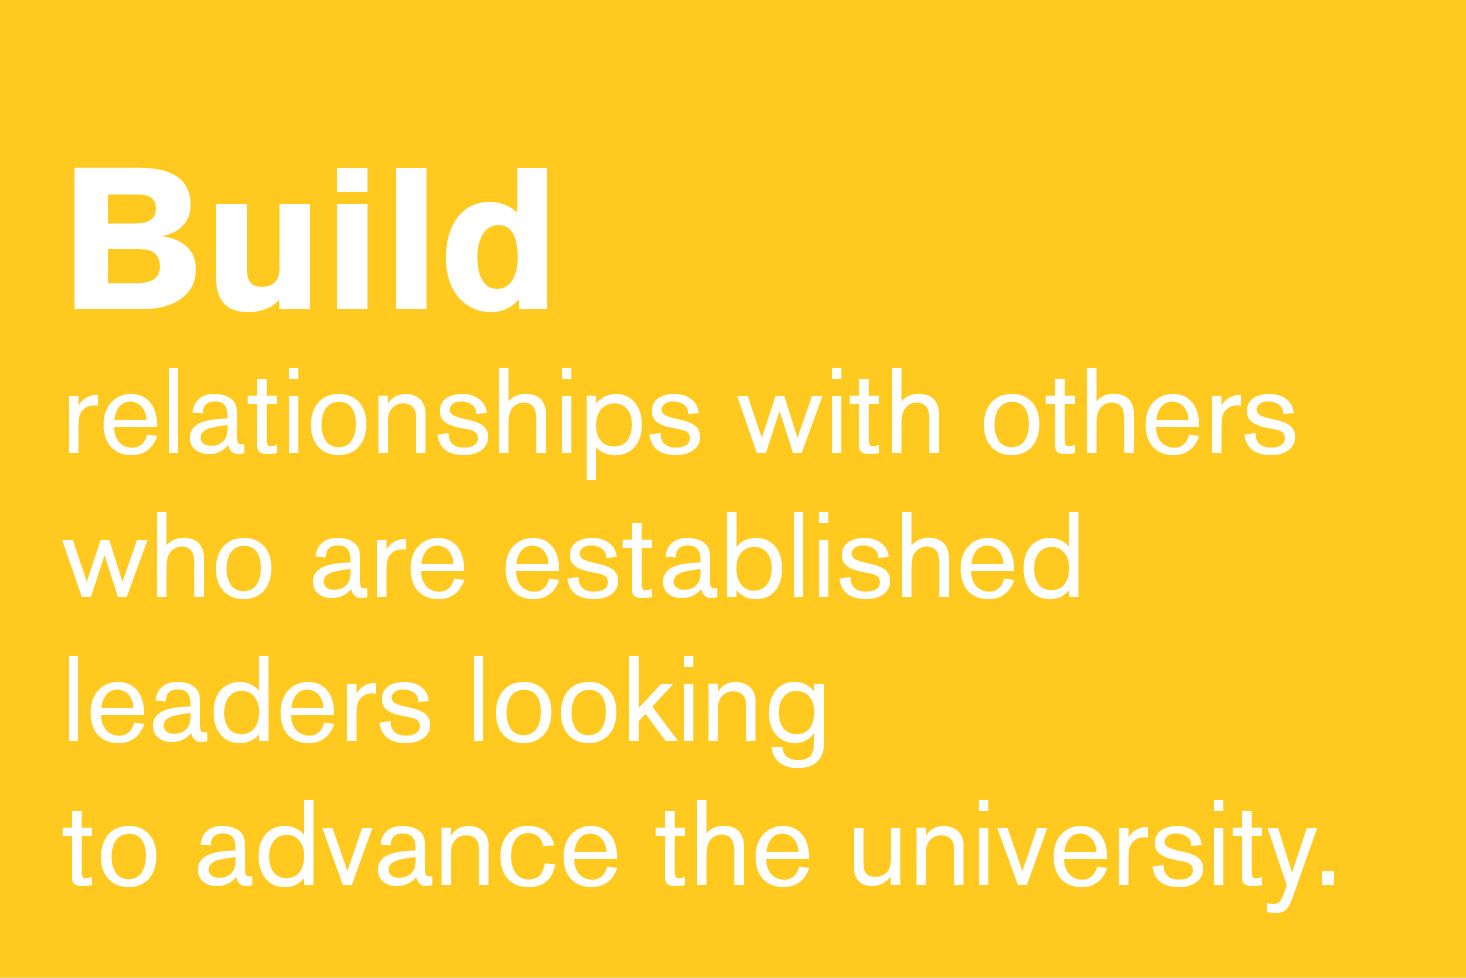 Build relationships with others who are established leaders looking to advance the university.